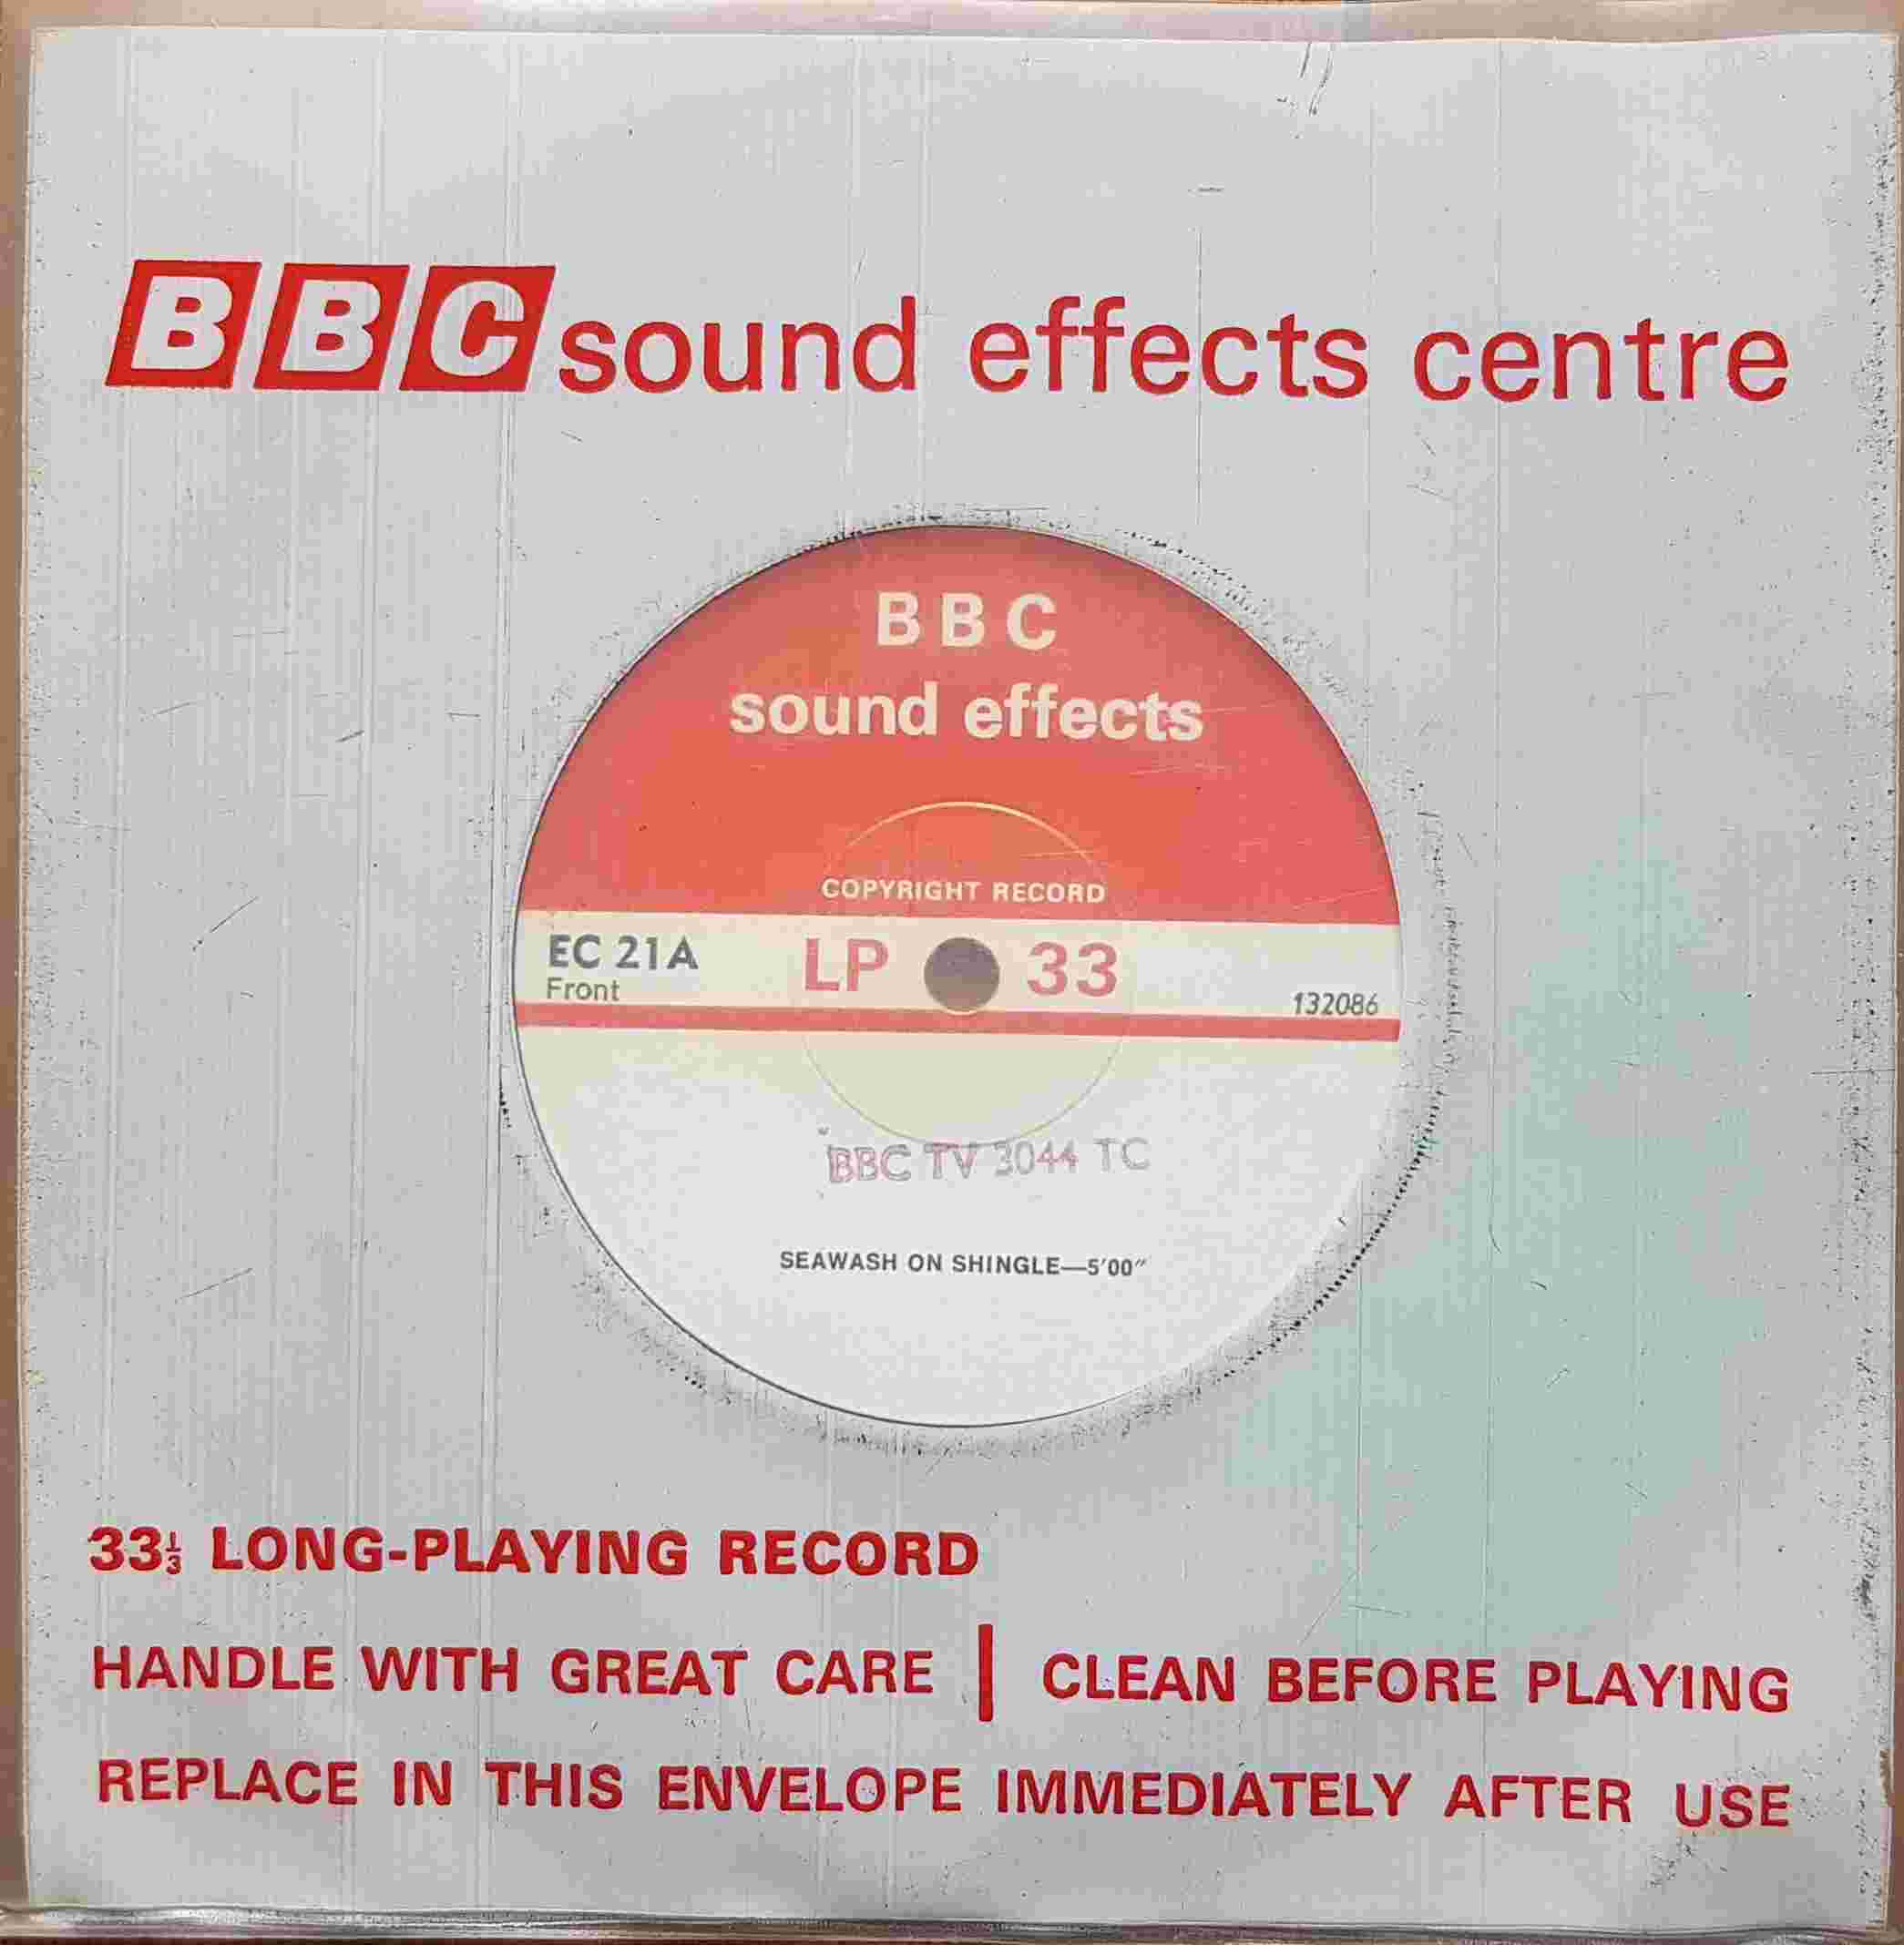 Picture of EC 21A Seawash by artist Not registered from the BBC records and Tapes library